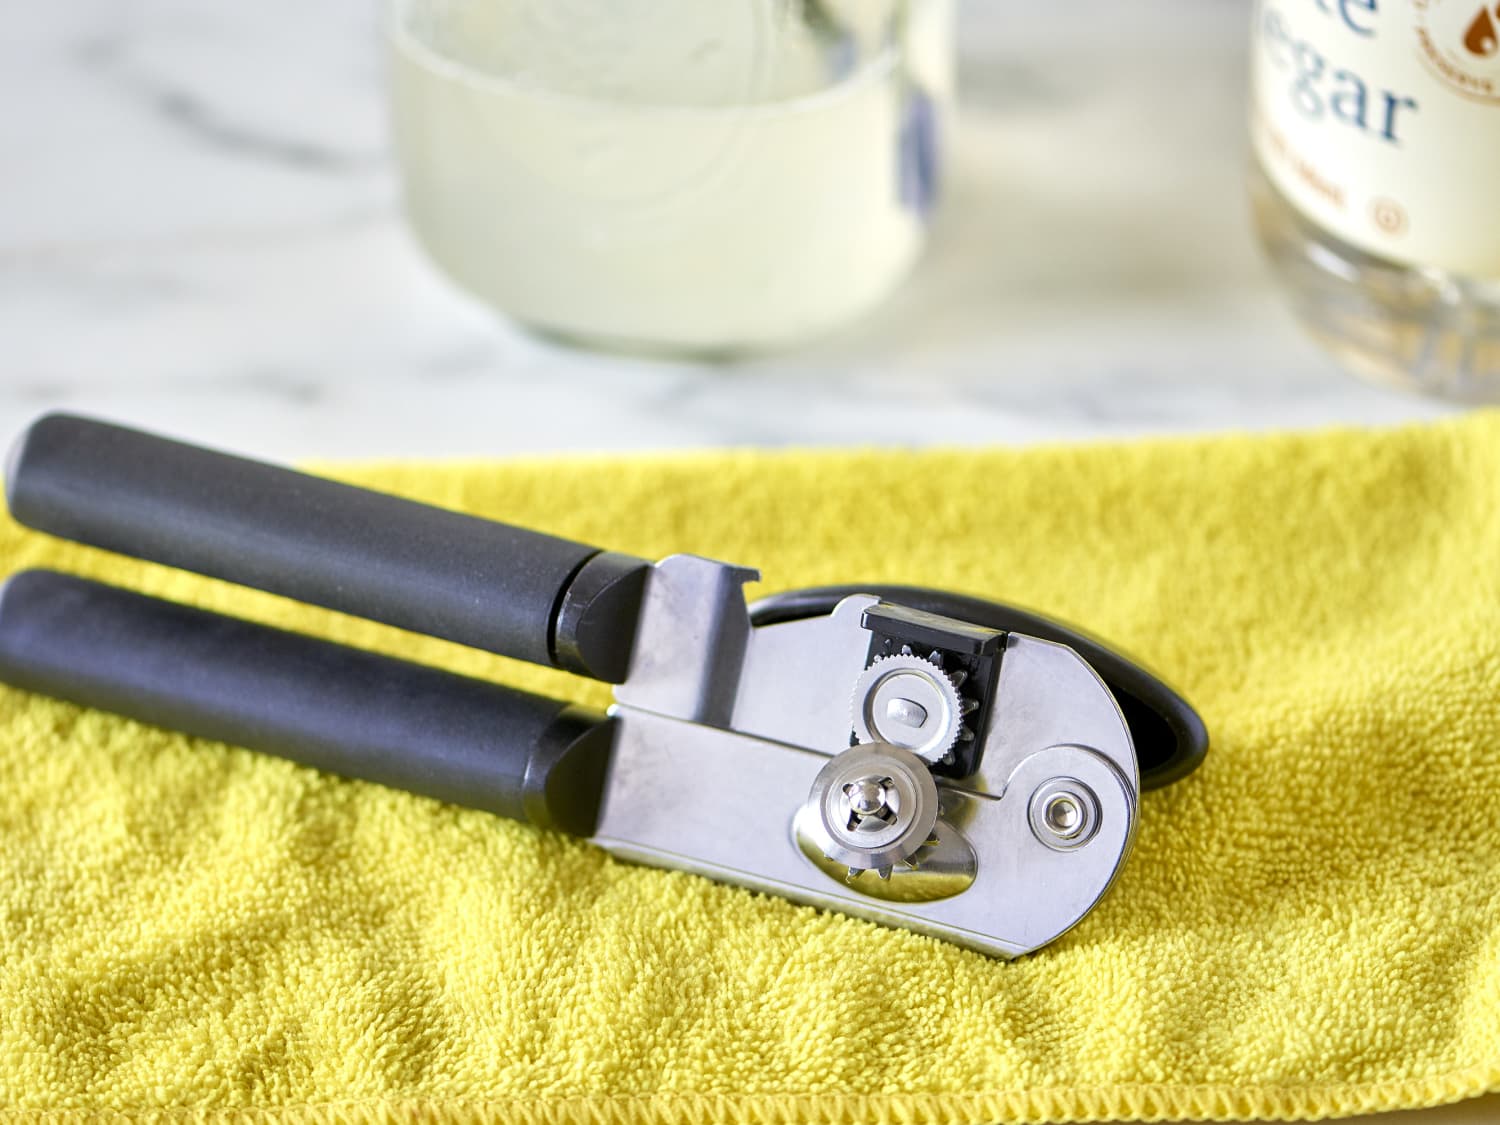 Zyliss Lock N' Lift Can Opener Review: Gets the Job Done